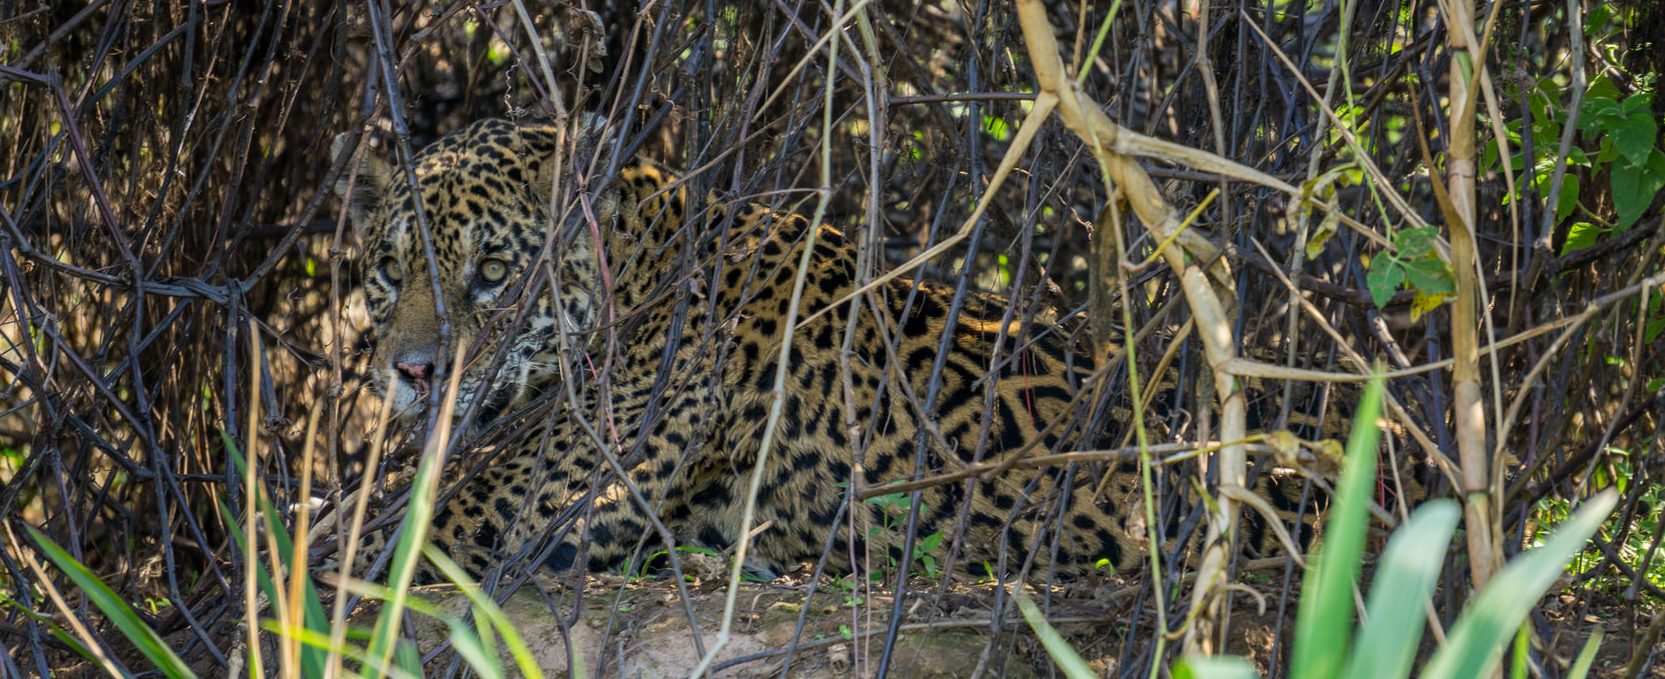 A very well camouflaged jaguar, hard to spot. 